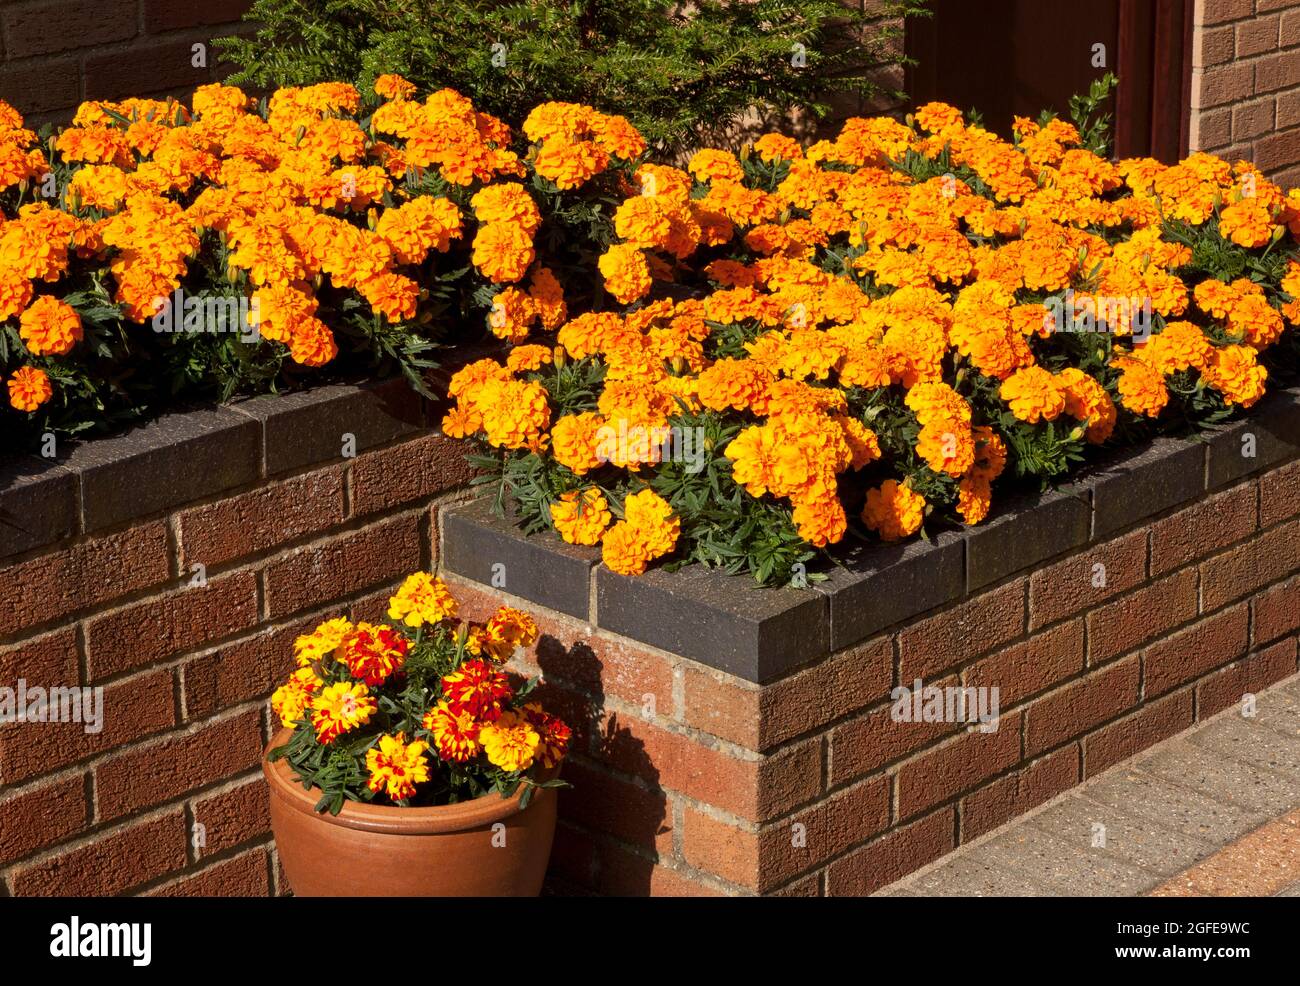 Raised Flower Bed on a Patio with a pot Stock Photo